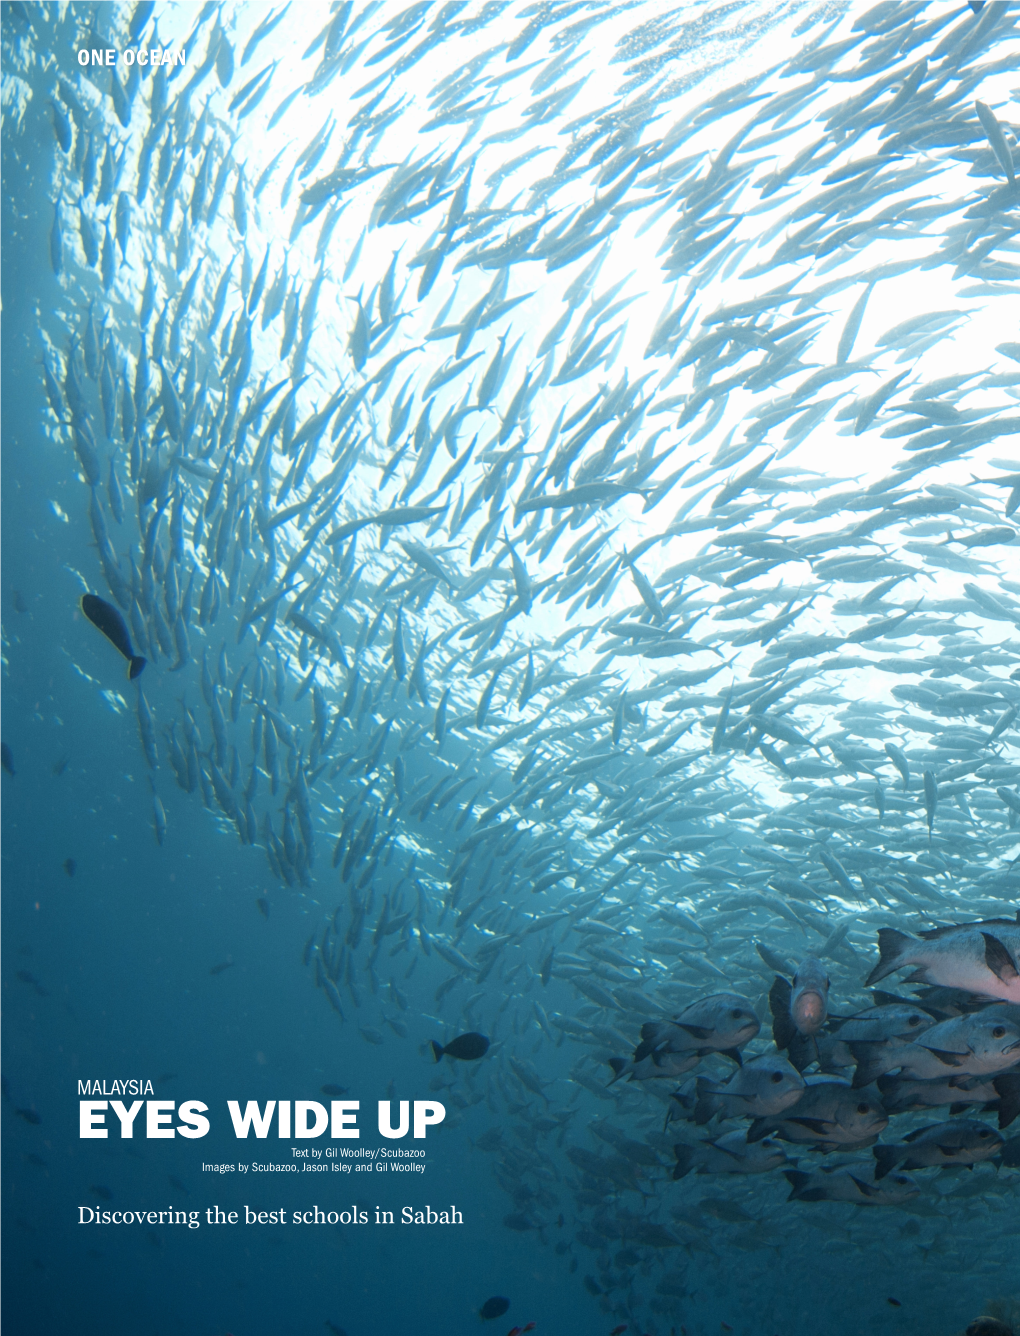 EYES WIDE up Text by Gil Woolley/Scubazoo Images by Scubazoo, Jason Isley and Gil Woolley